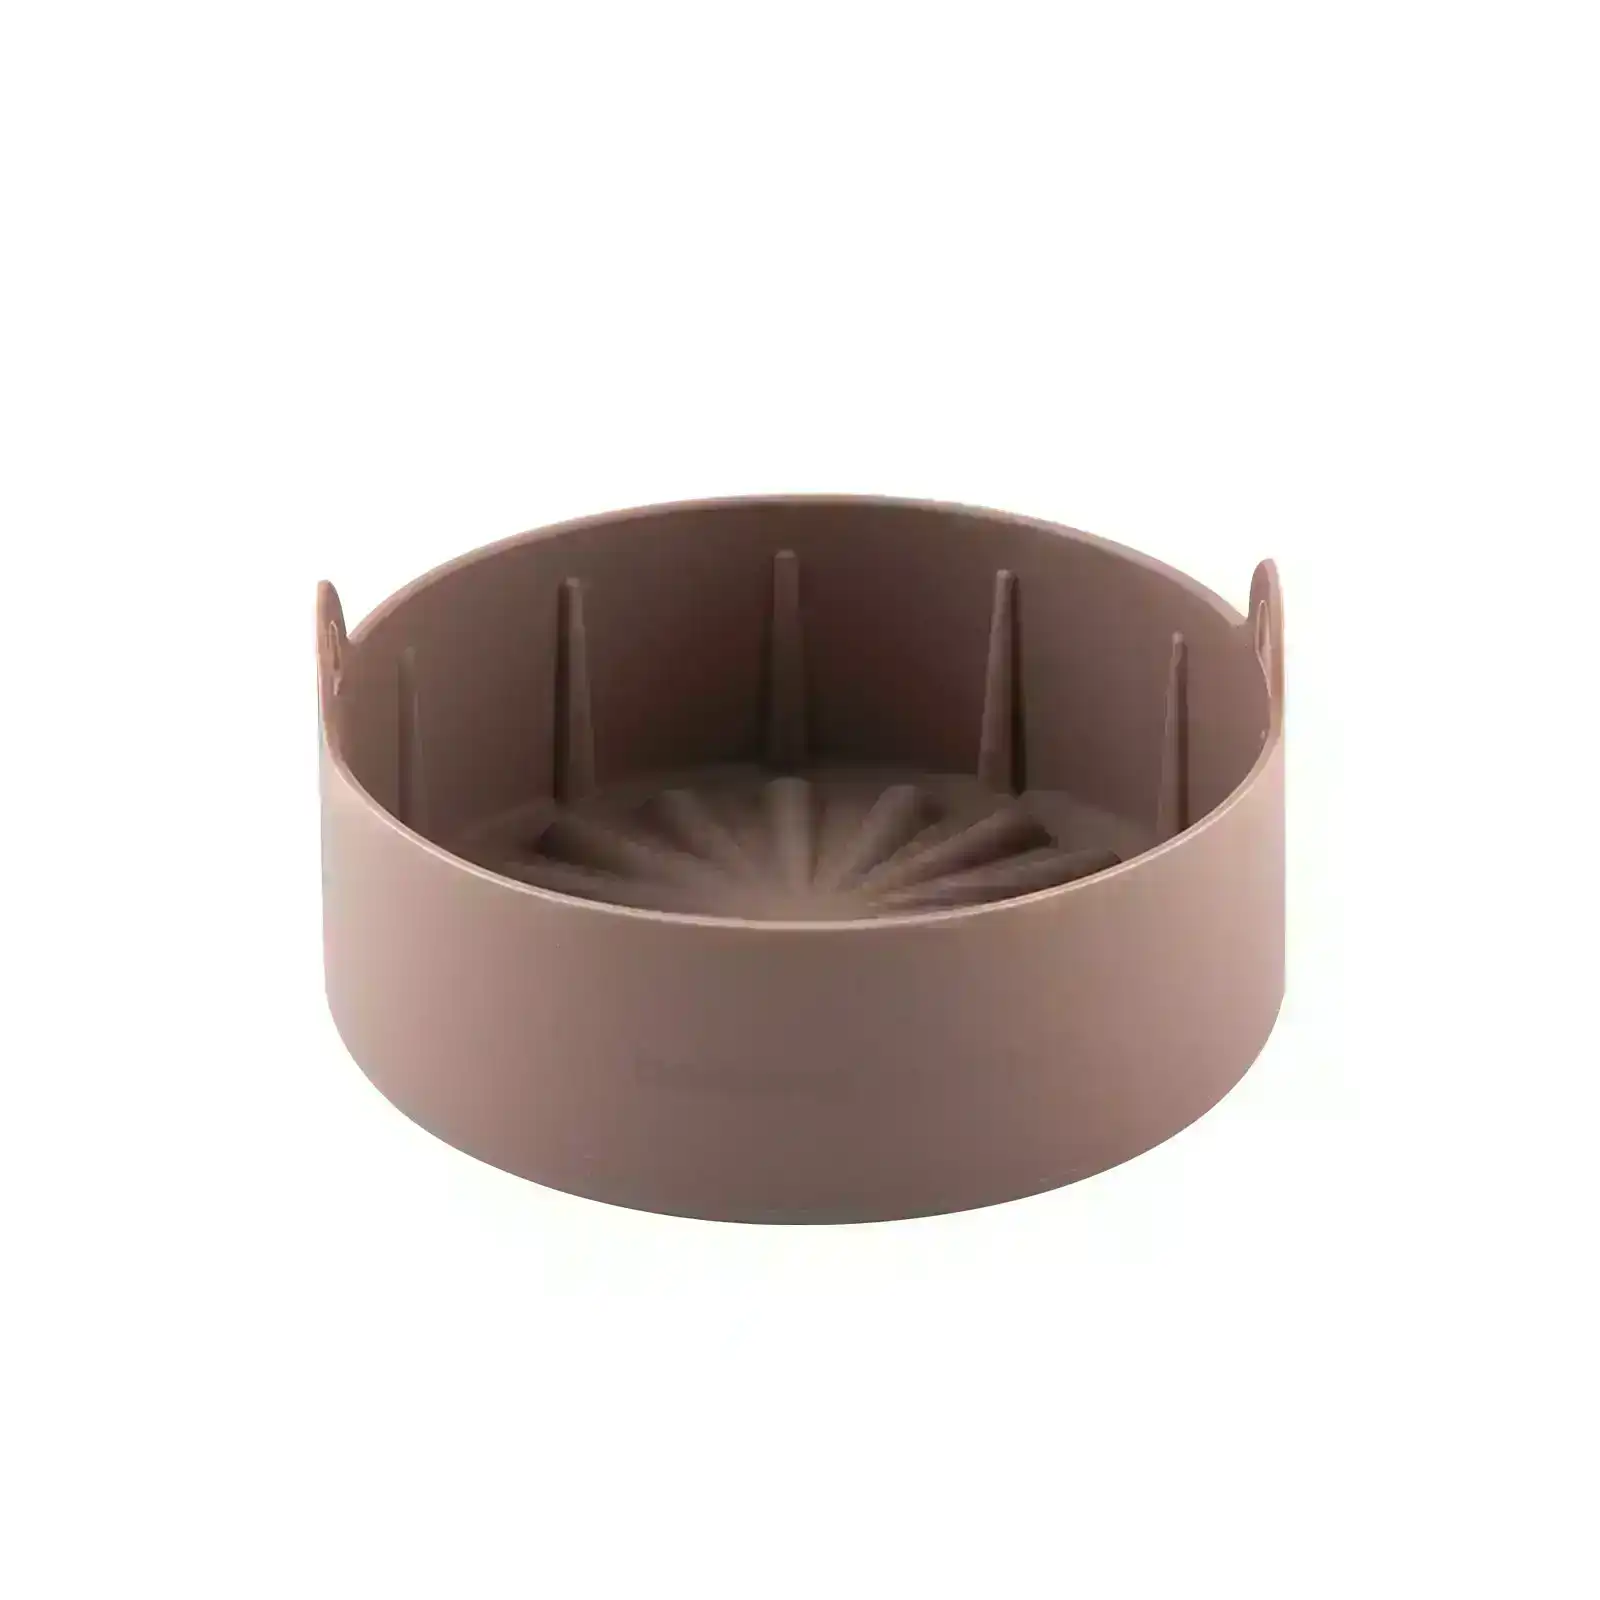 Airfryer Reusable Silicone Pot Small - CHOCOLATE